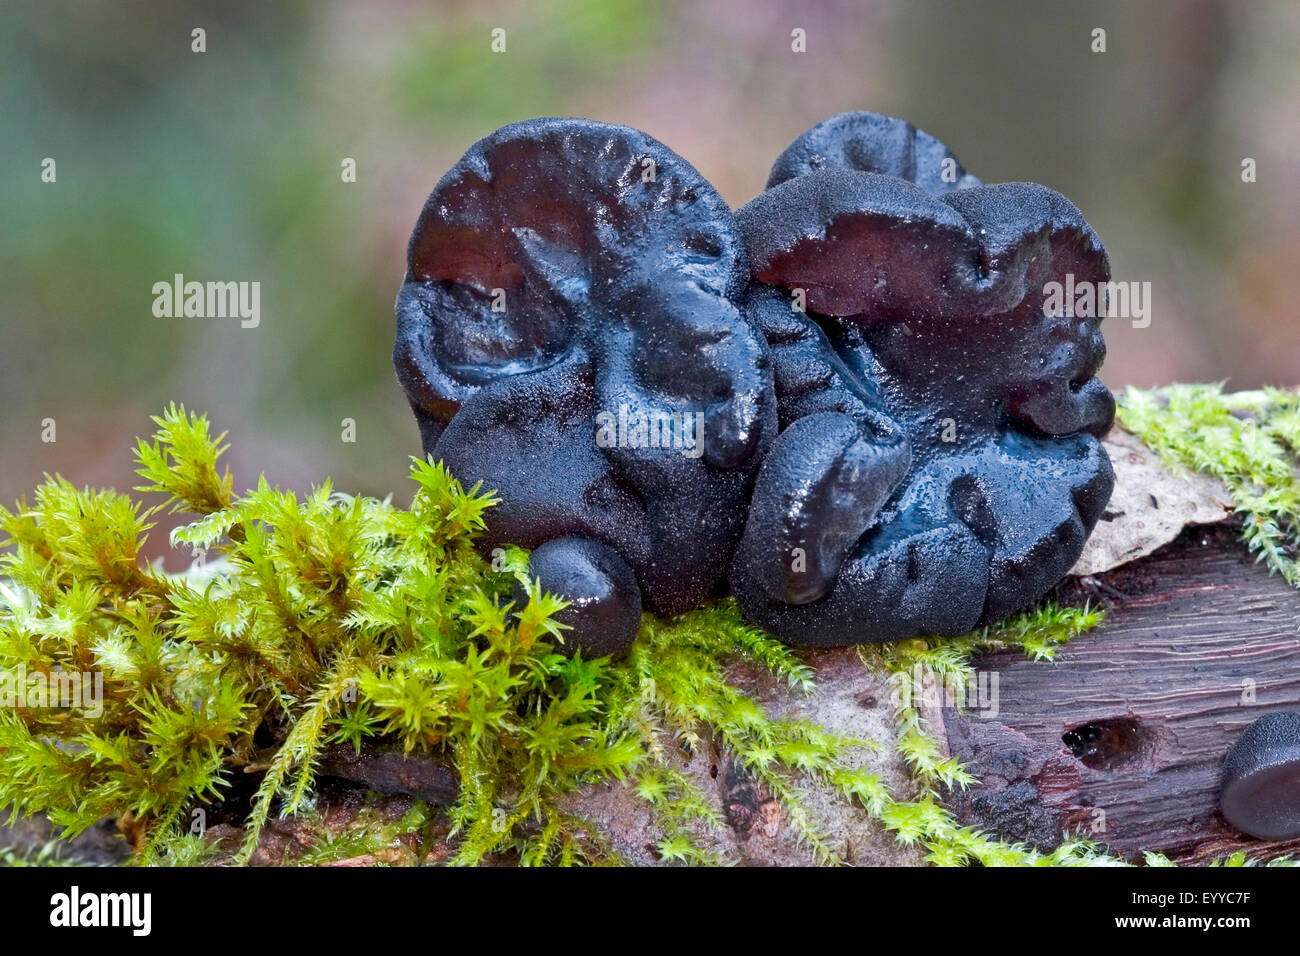 Witches' butter, Black witches' butter, Black jelly roll, Warty jelly fungus (Exidia glandulosa, Exidia truncata), fruiting body on mossy deadwood, Germany Stock Photo